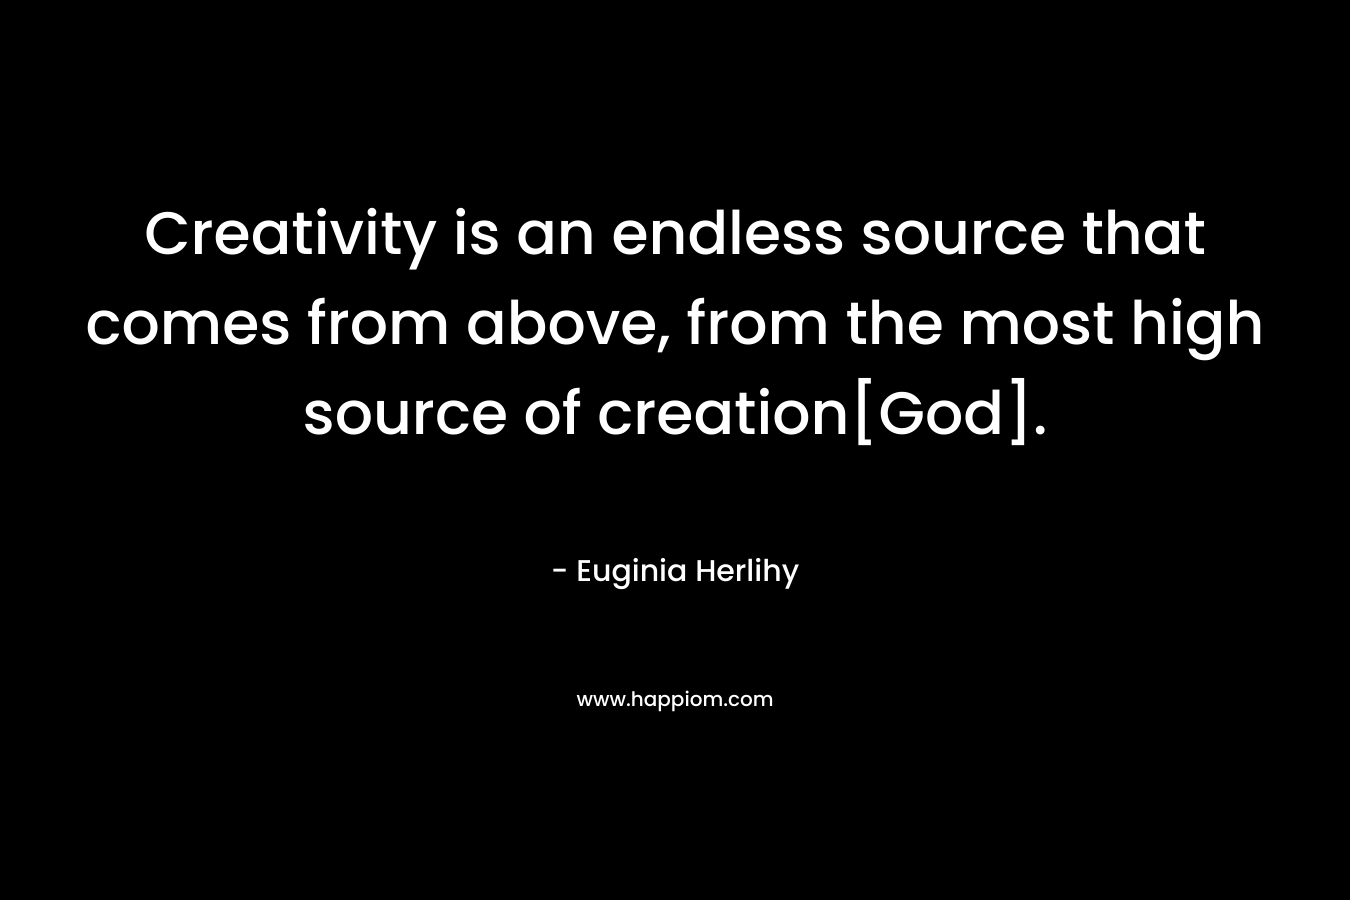 Creativity is an endless source that comes from above, from the most high source of creation[God].